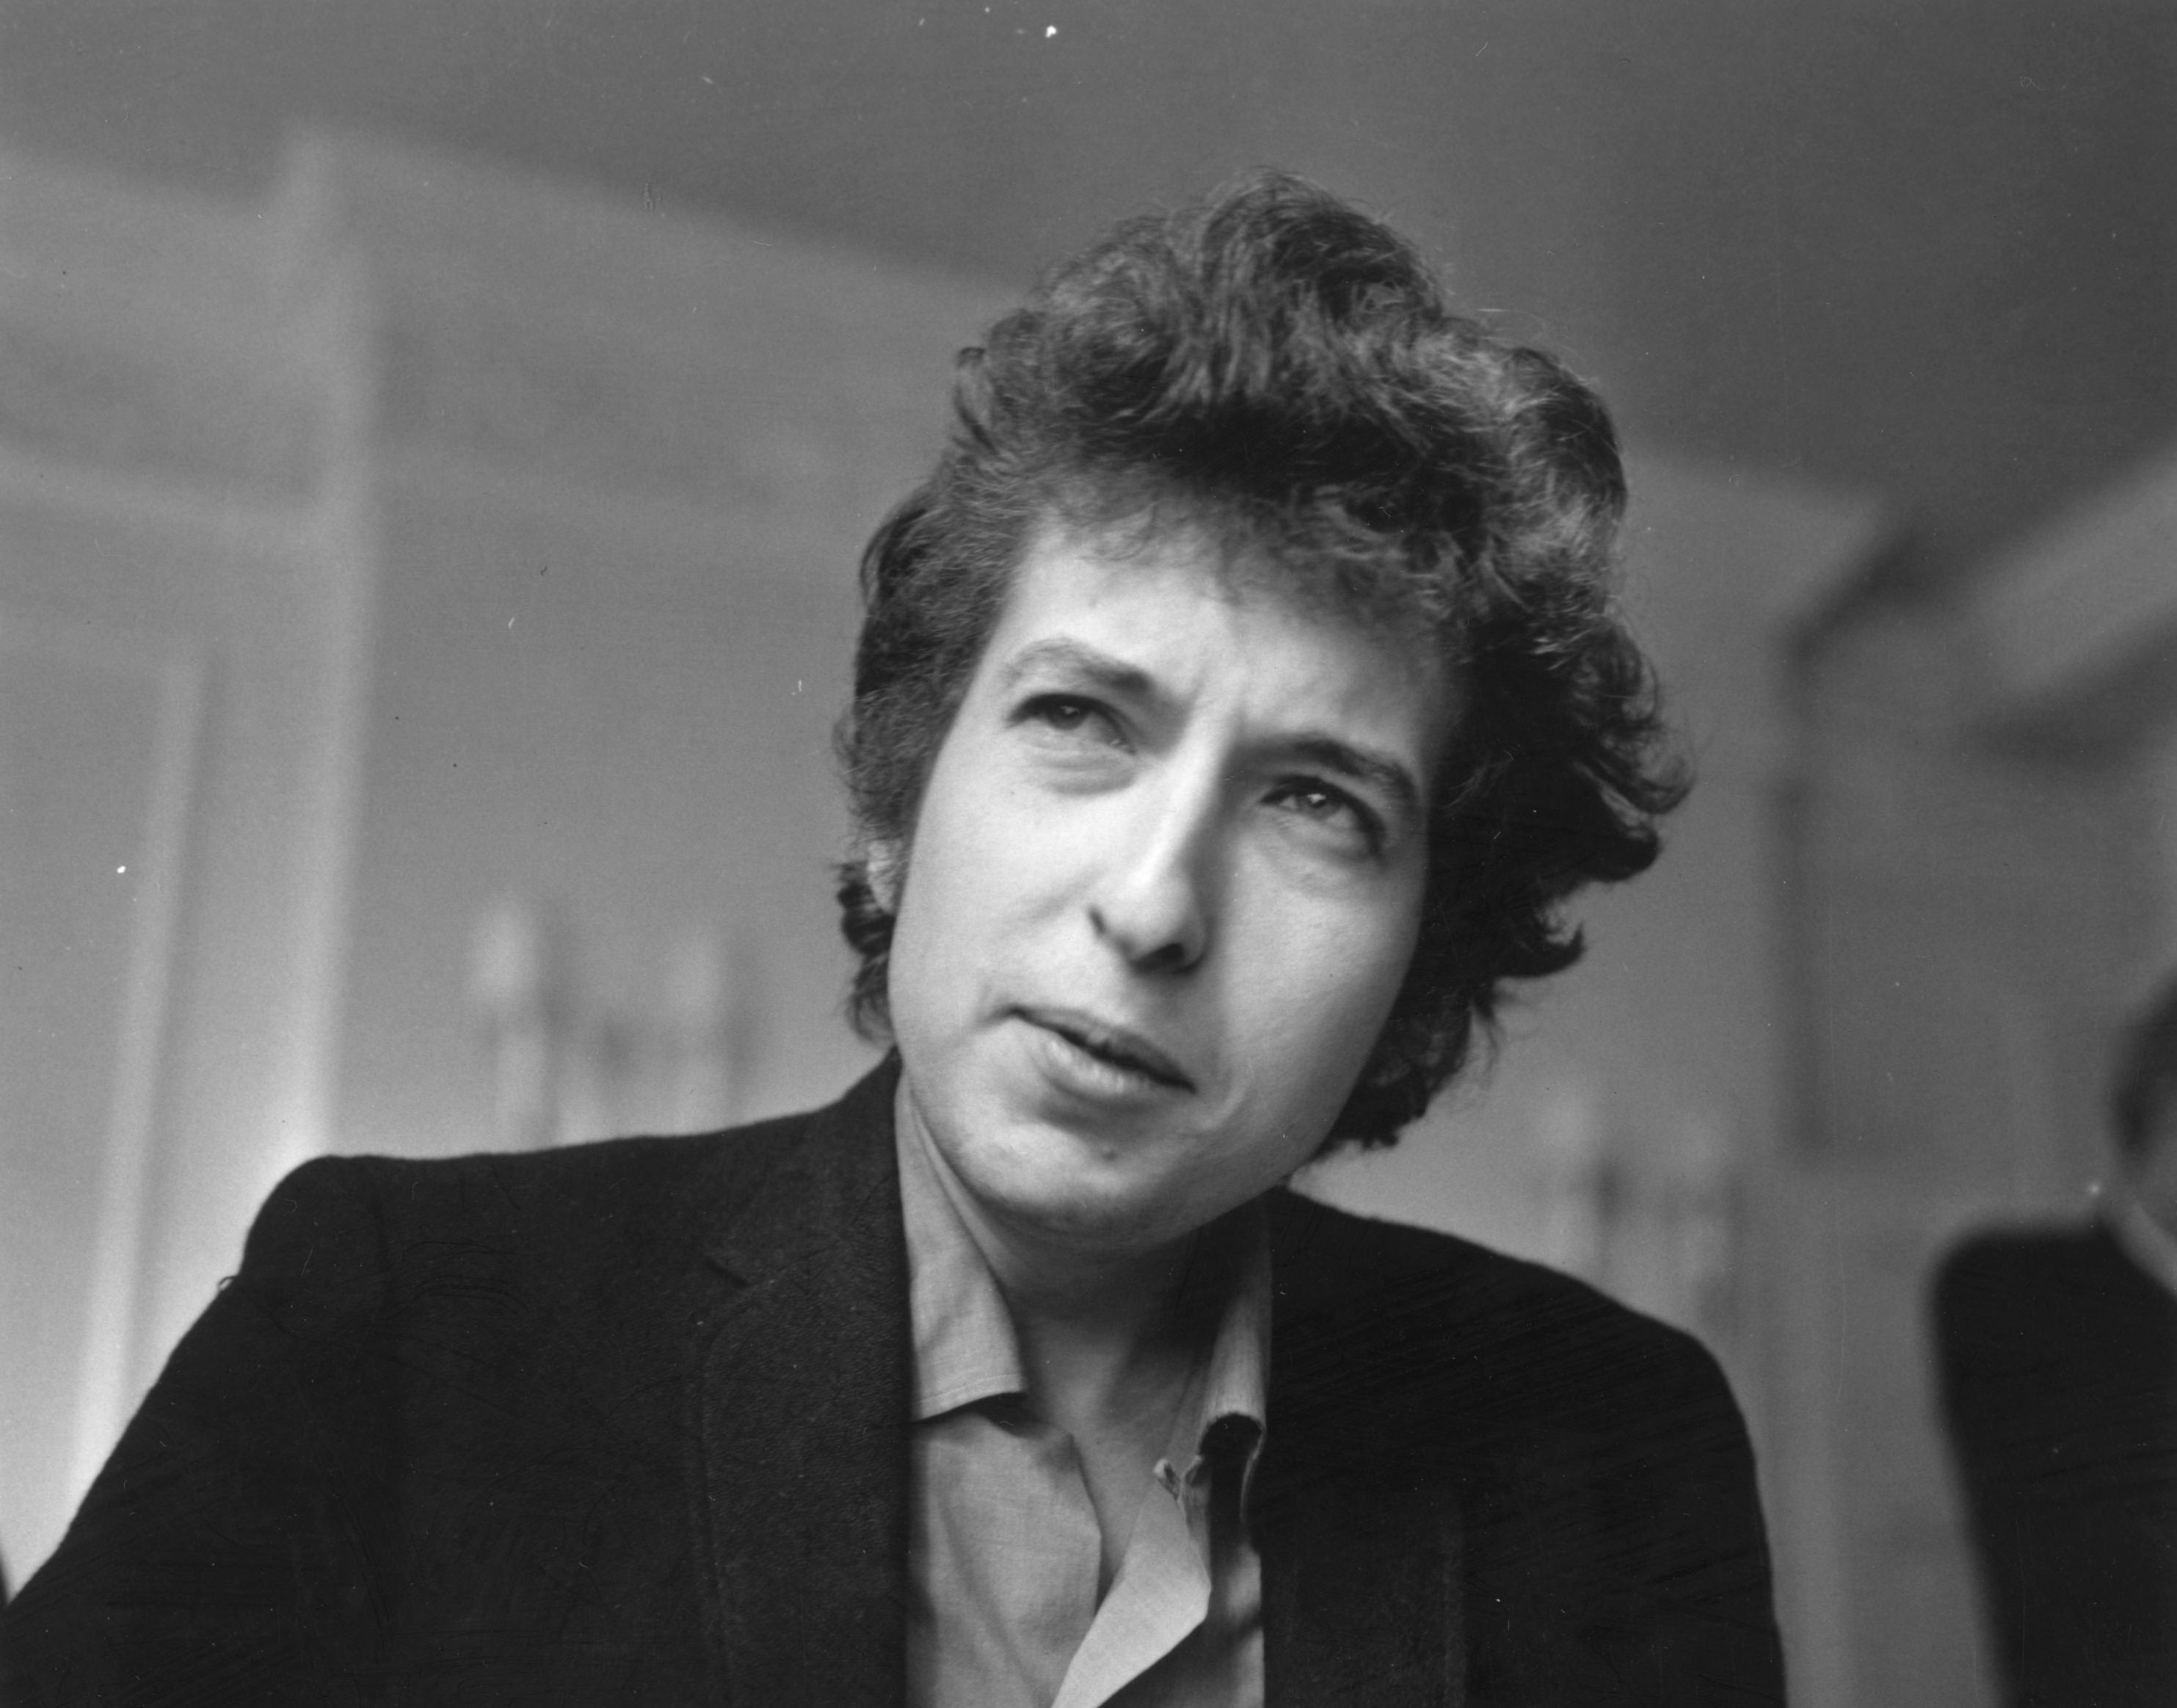 A black and white picture of Bob Dylan wearing a jacket.